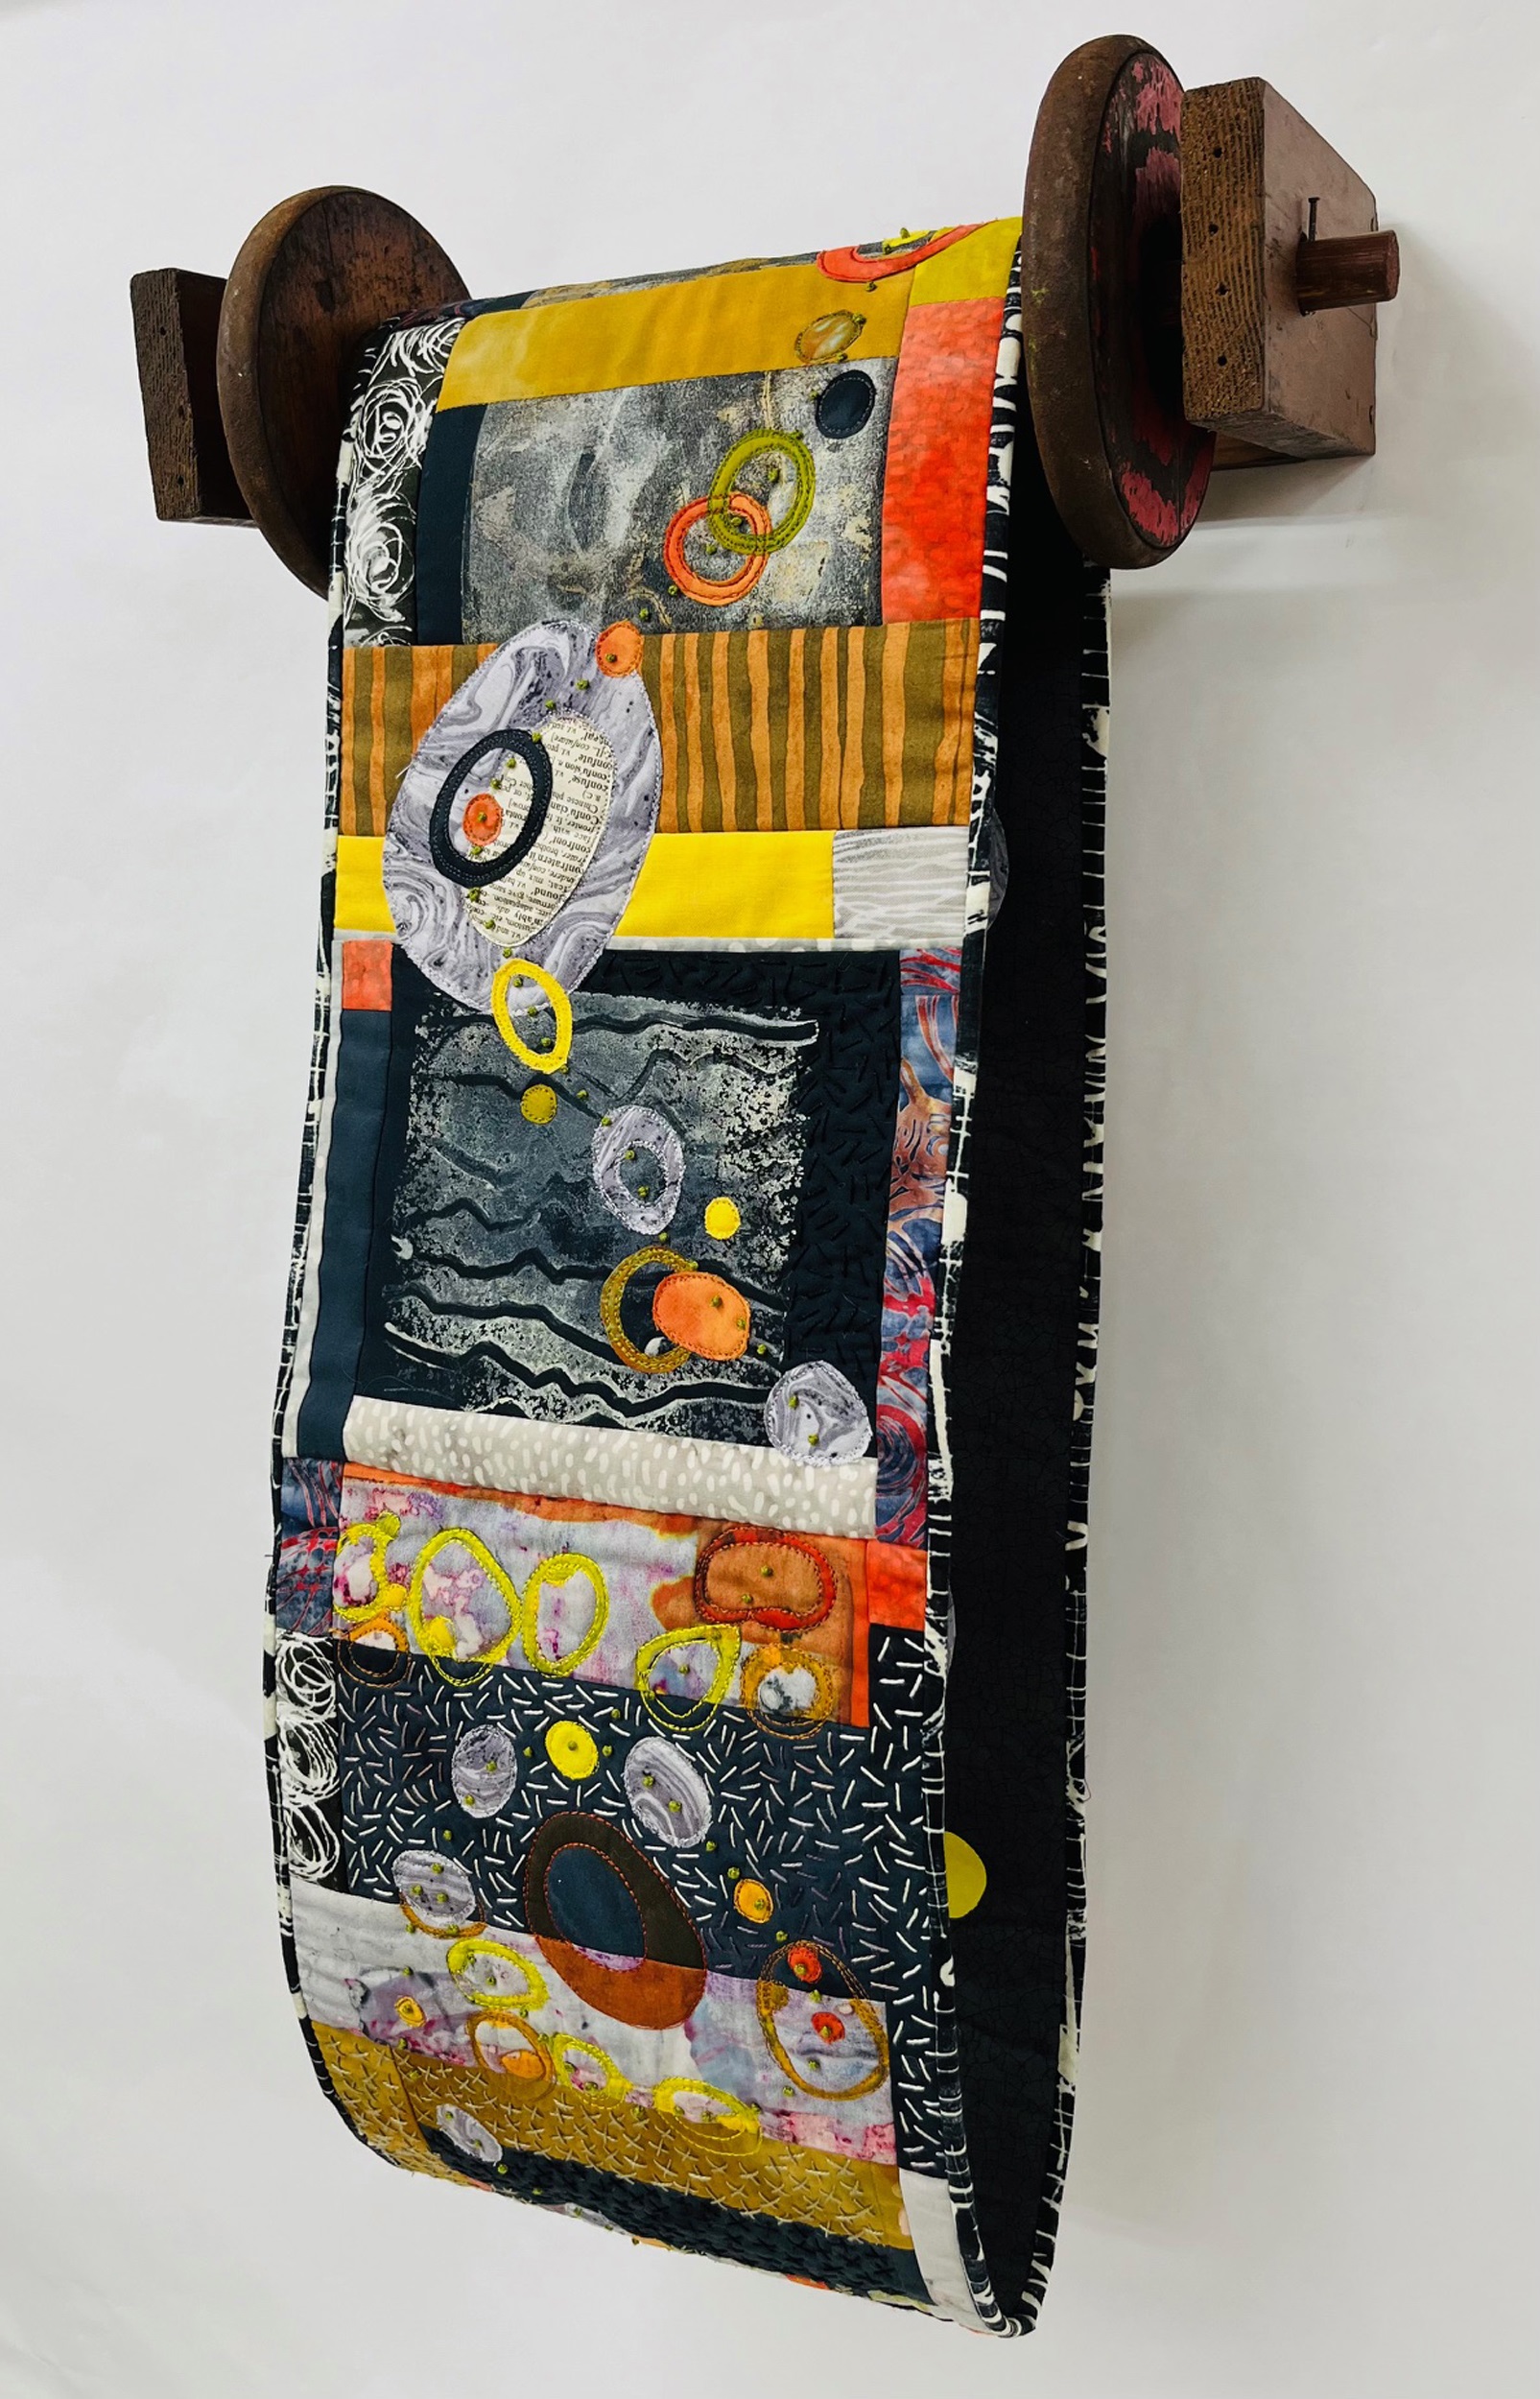 Charlotte Bird, Indecision, 2023. Hand cut fused appliqué, machine stitched, machine quilted, hand embroidered, vintage pine, vintage textile spool, hand colored dowel, 24” x 15” x 8”.